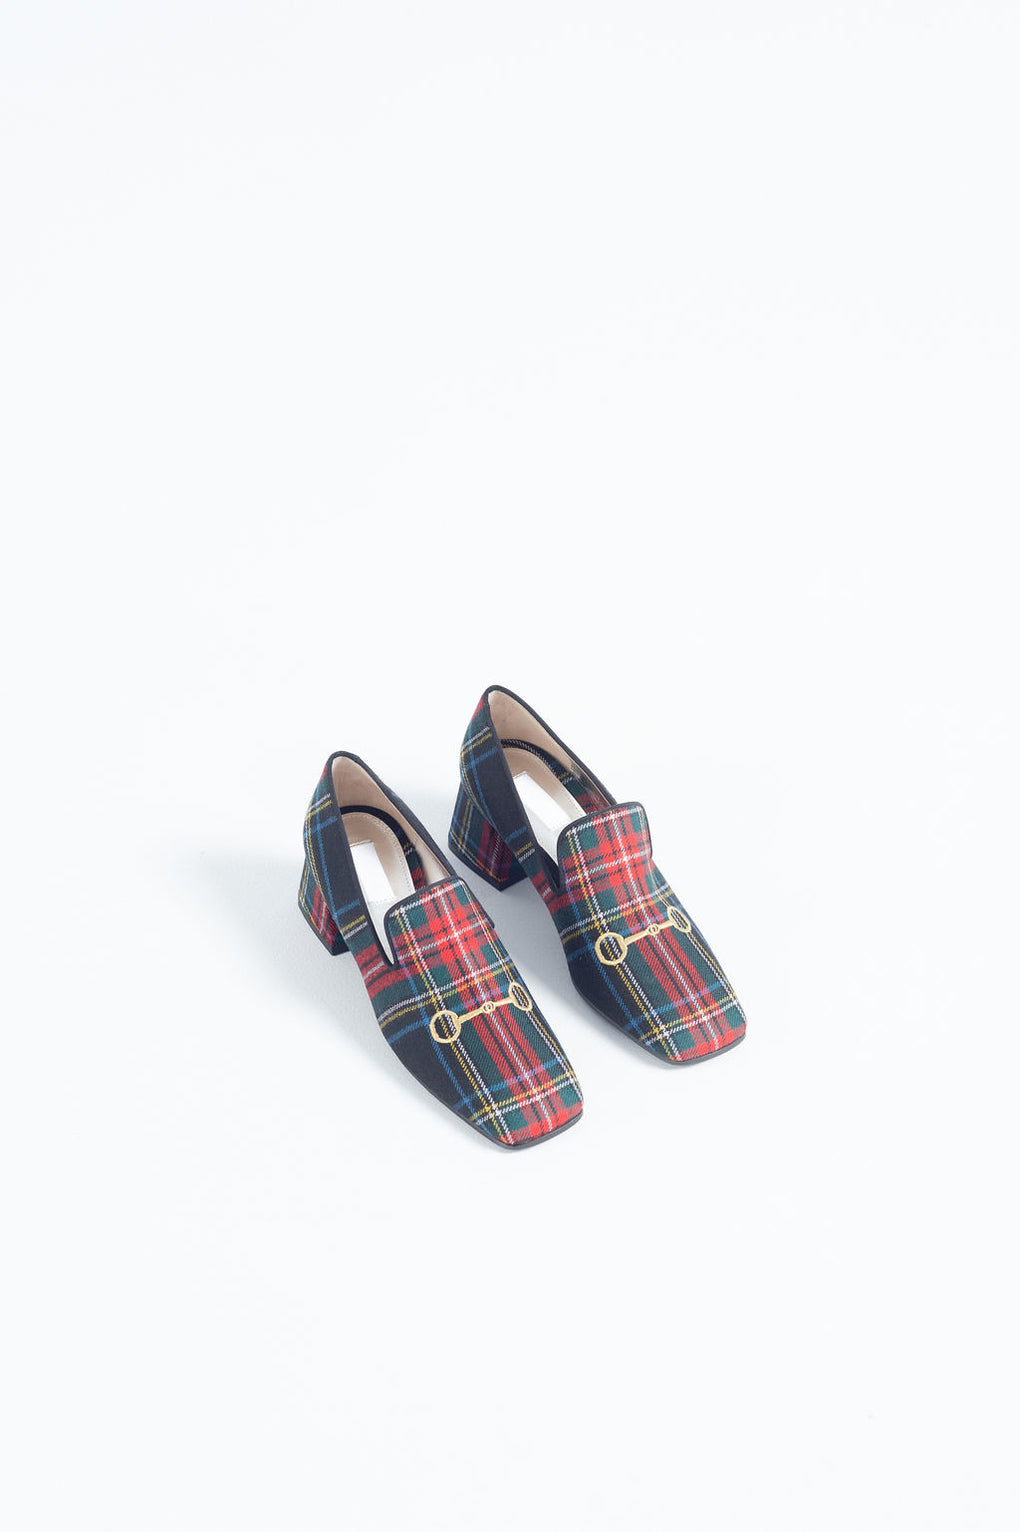 Suzanne Rae-Suzanne Rae loafers-Ecossais Smoking Loafer-plaid smoking loafer-Idun-St. Paul